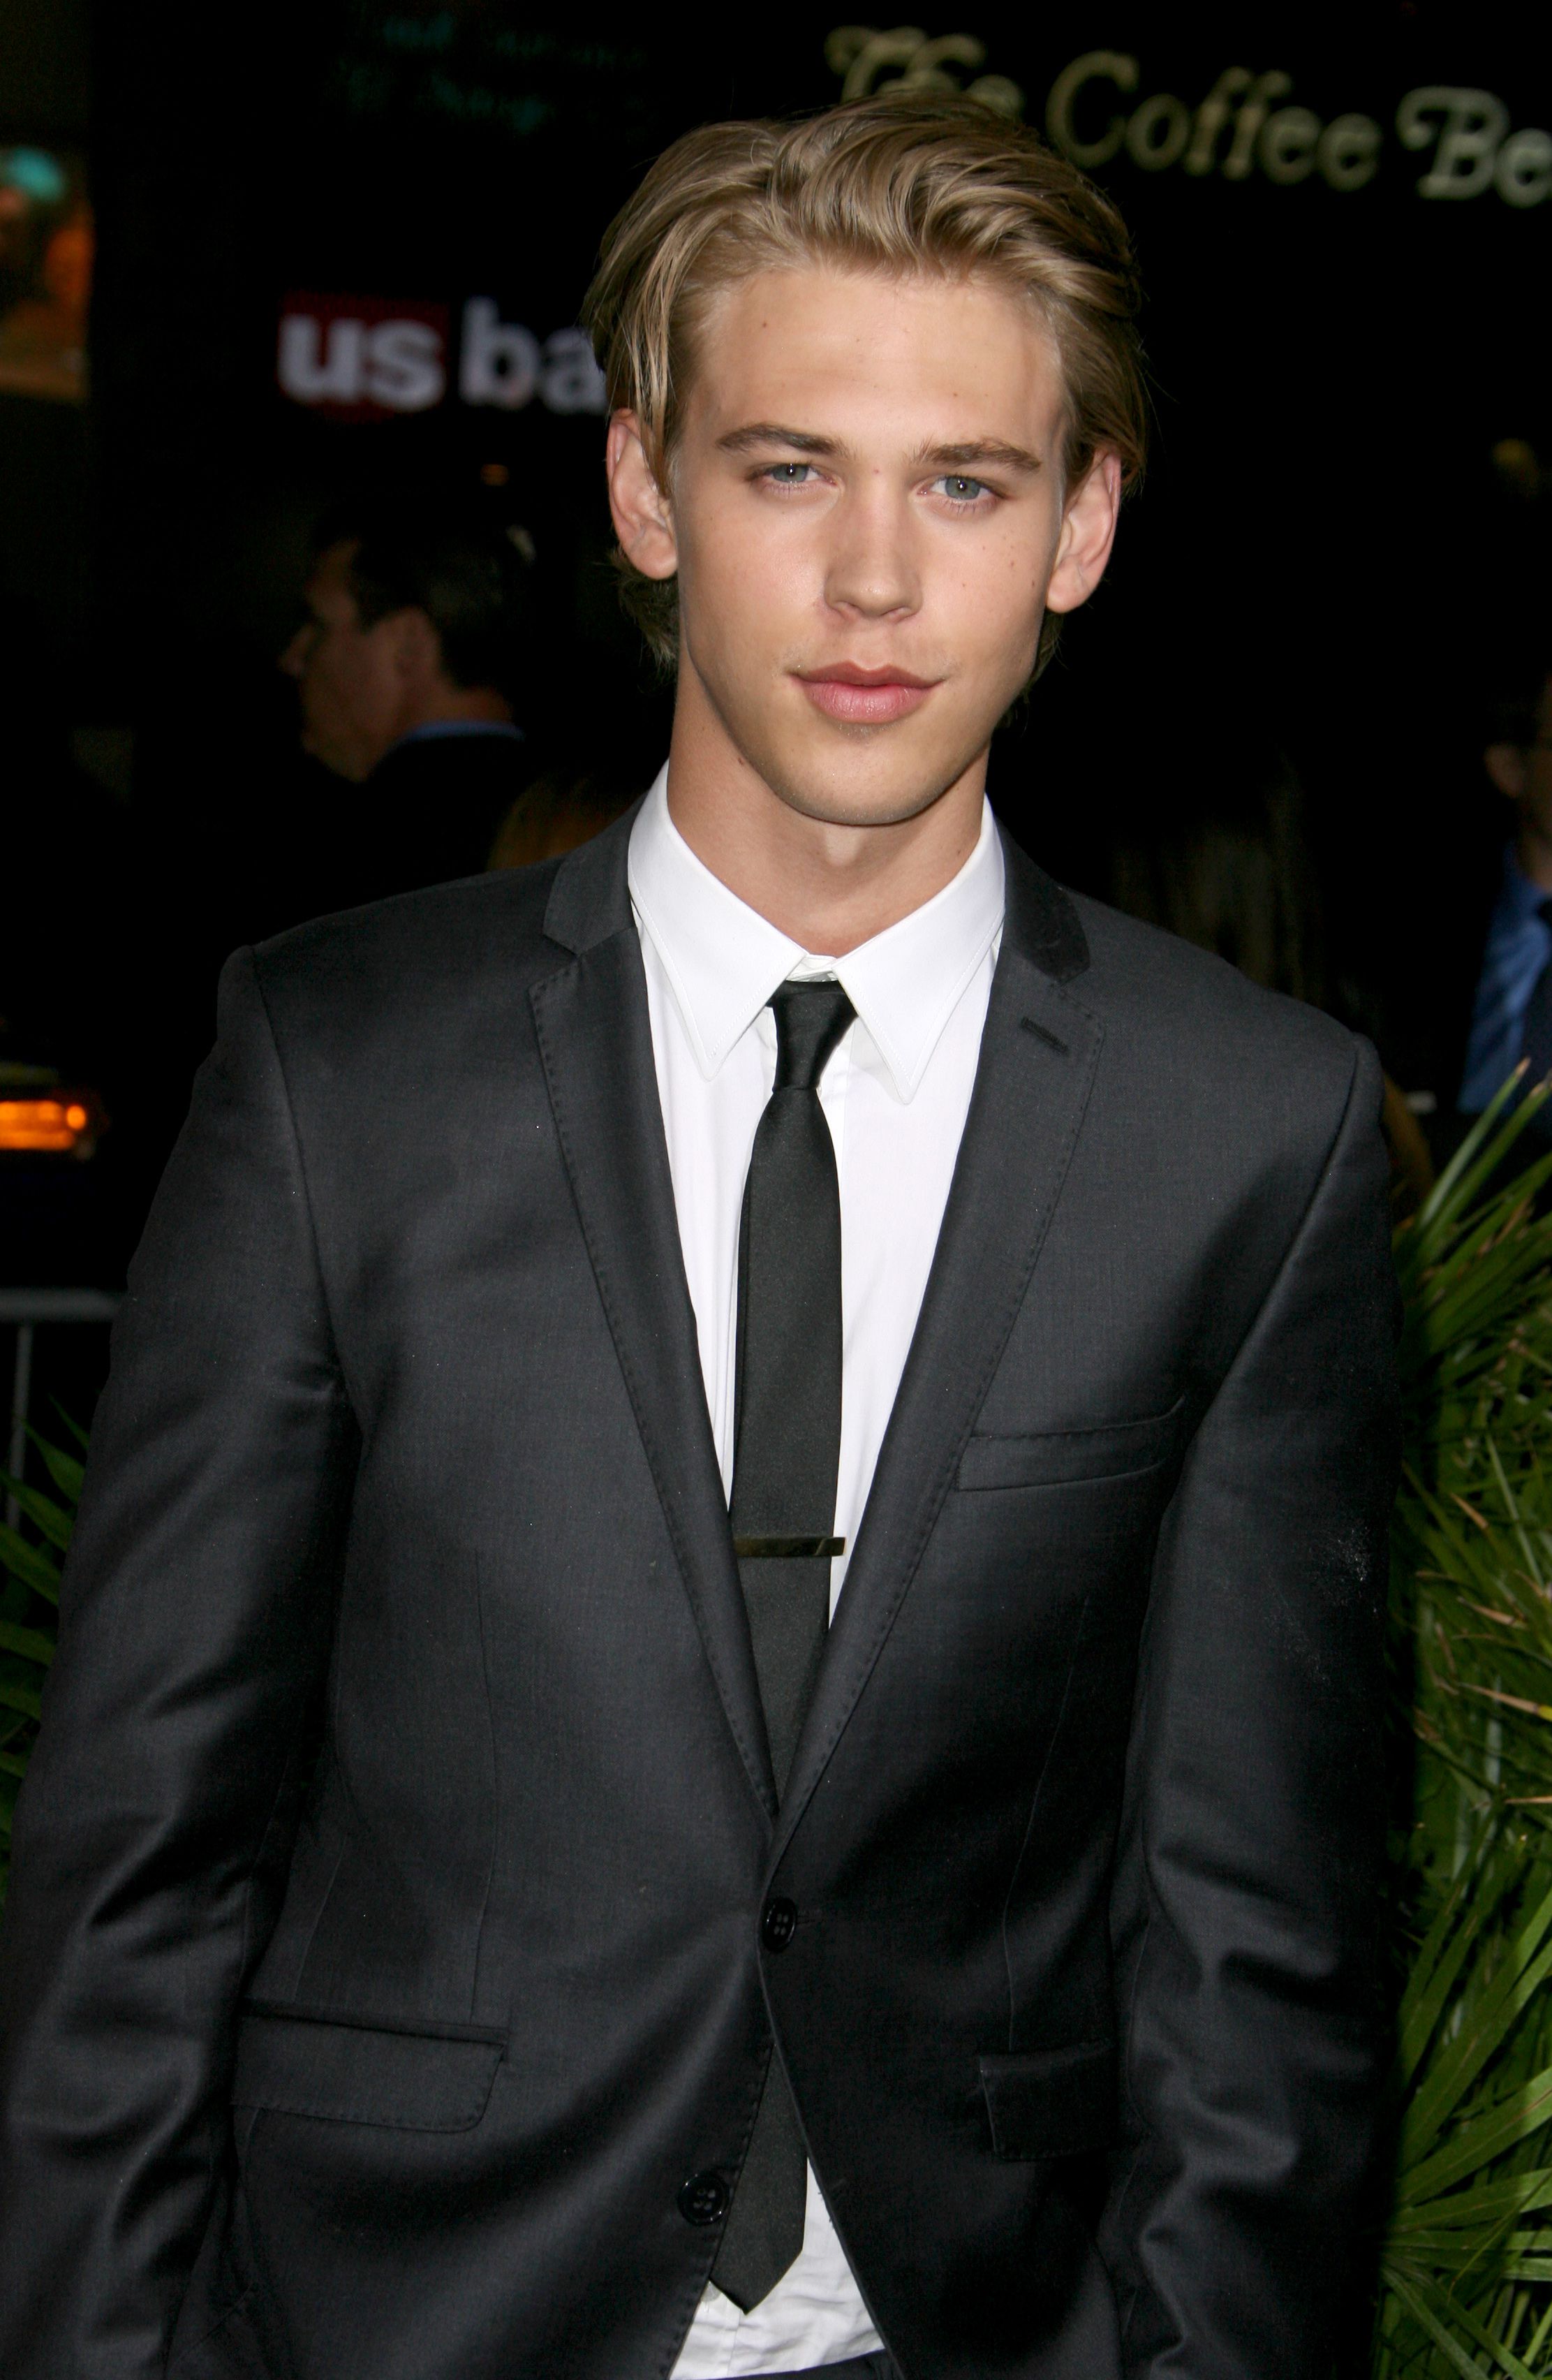 Austin Butler's Photo Transformation From 'Zoey 101' to 'Elvis' | J-14